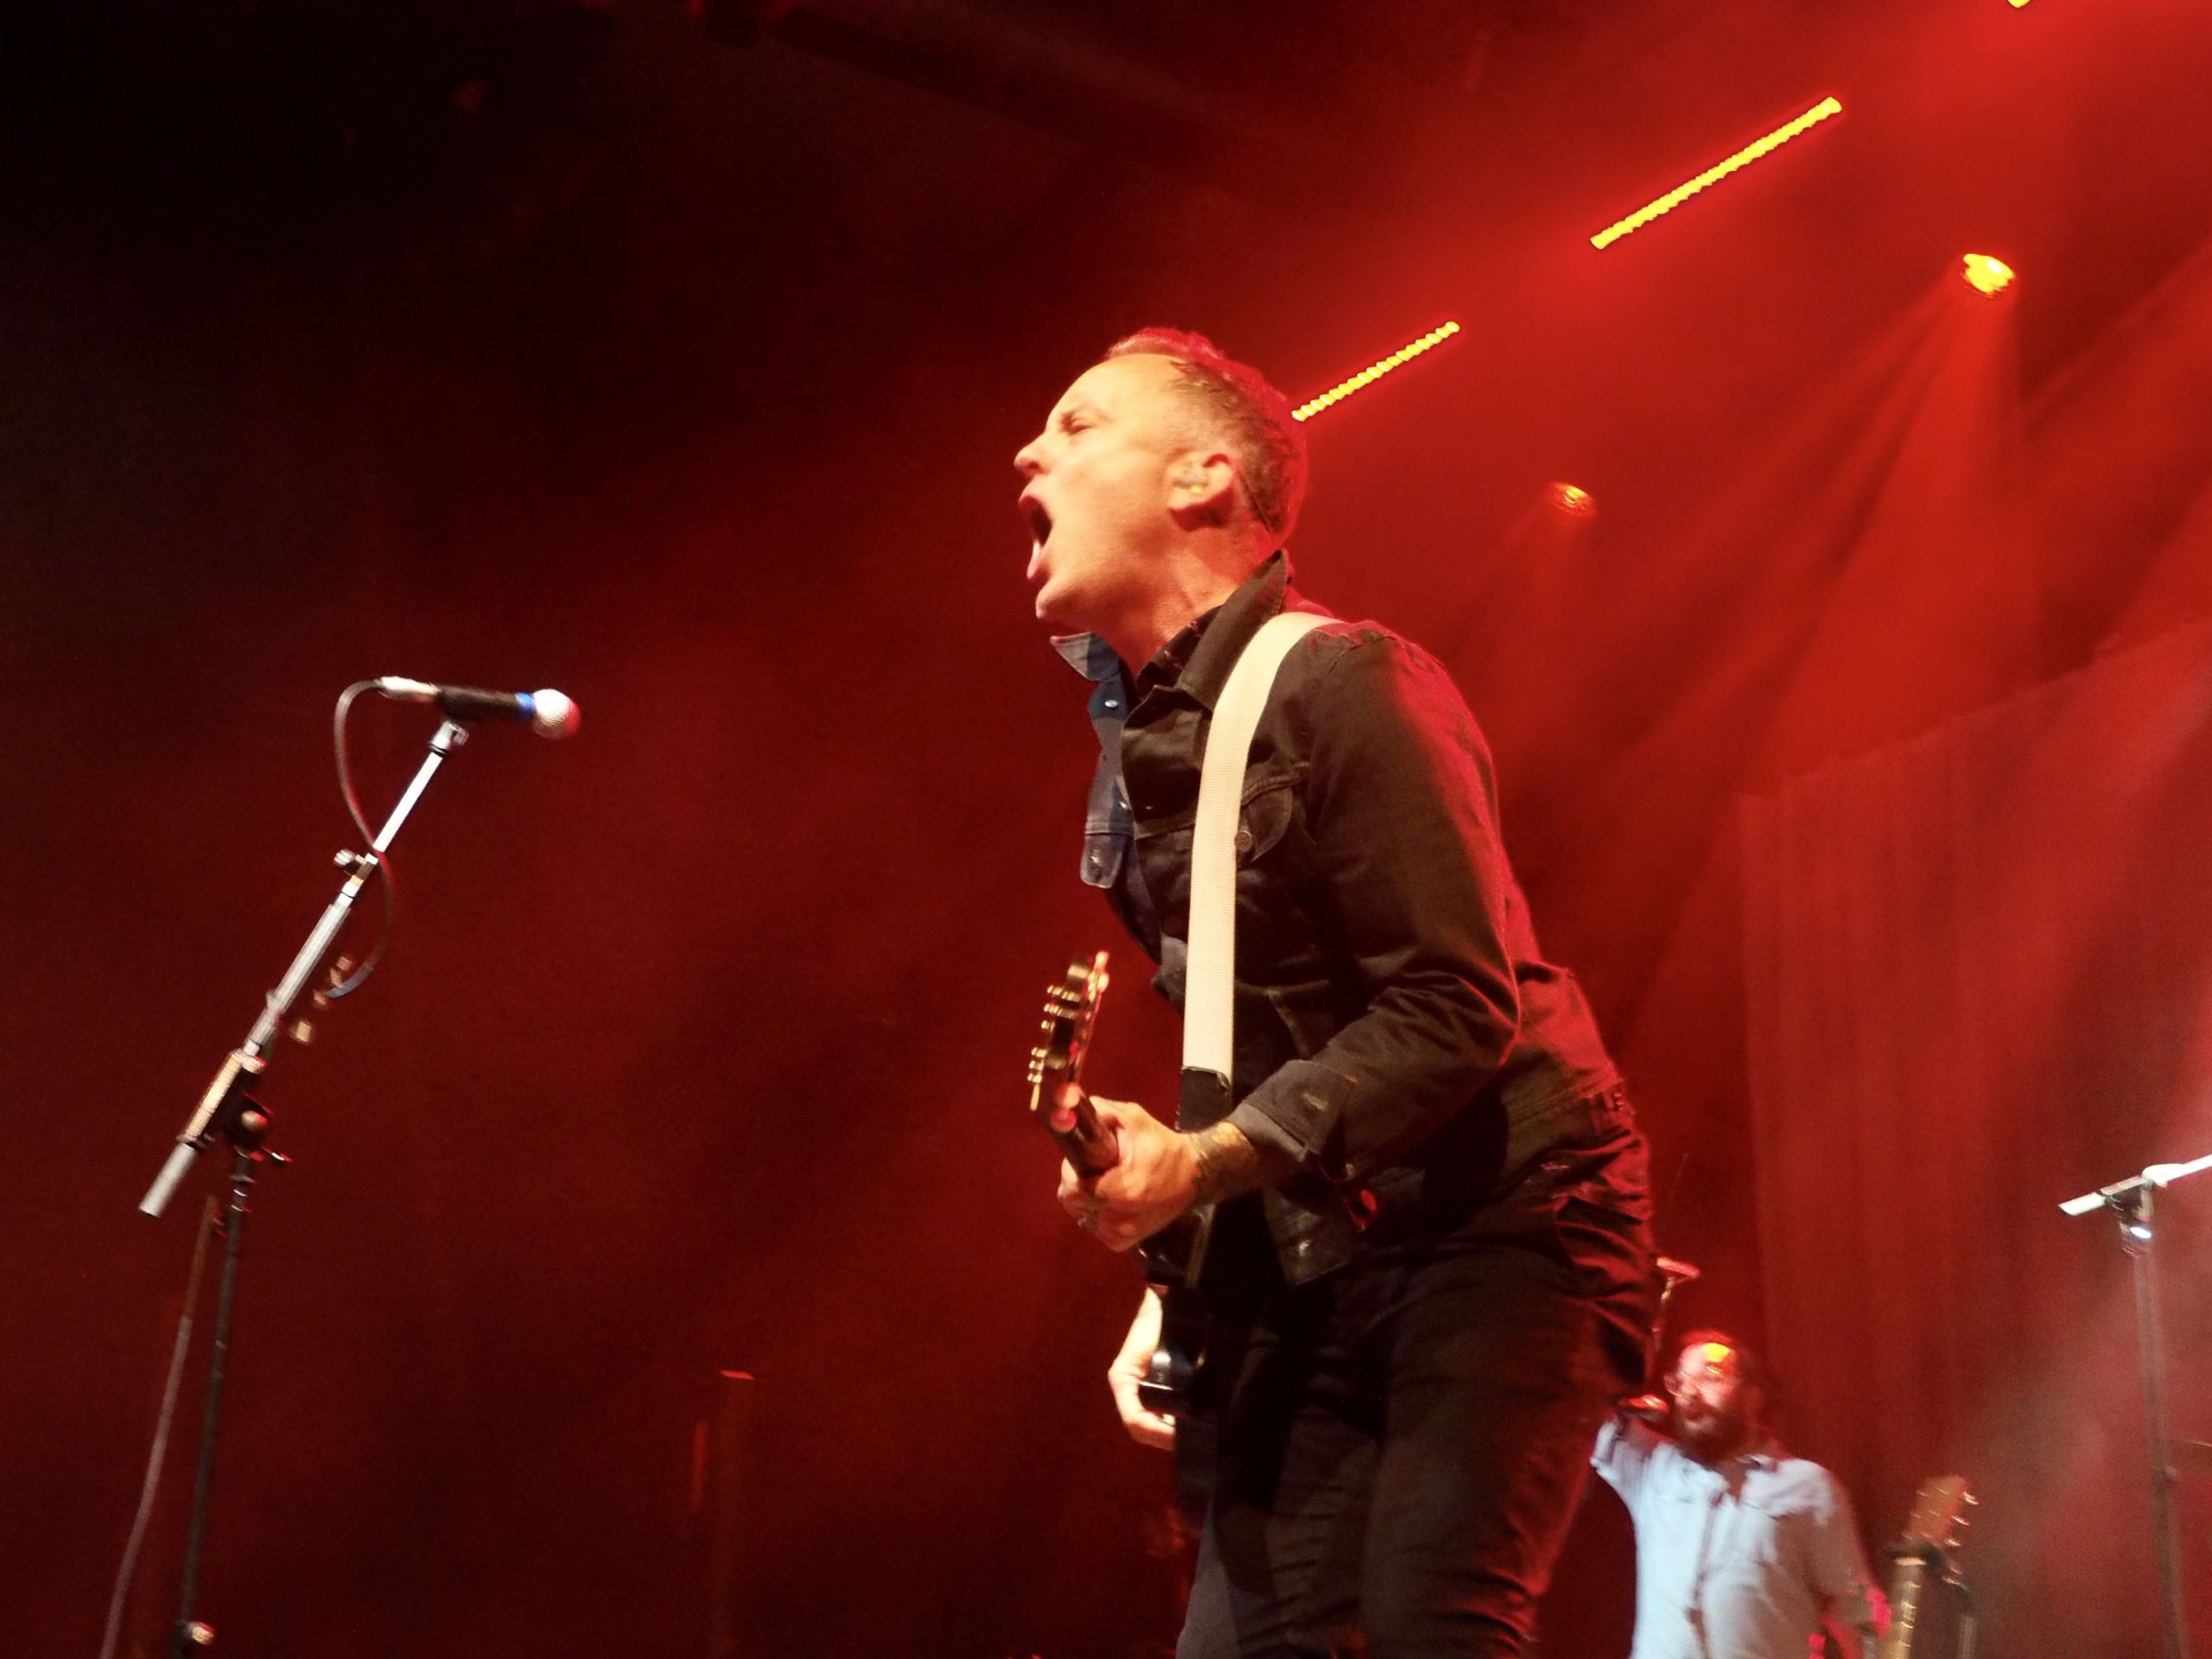 Dave Hause @ Lost Evenings V Berlin, 16.09.2022 - Foto: Olli Exner